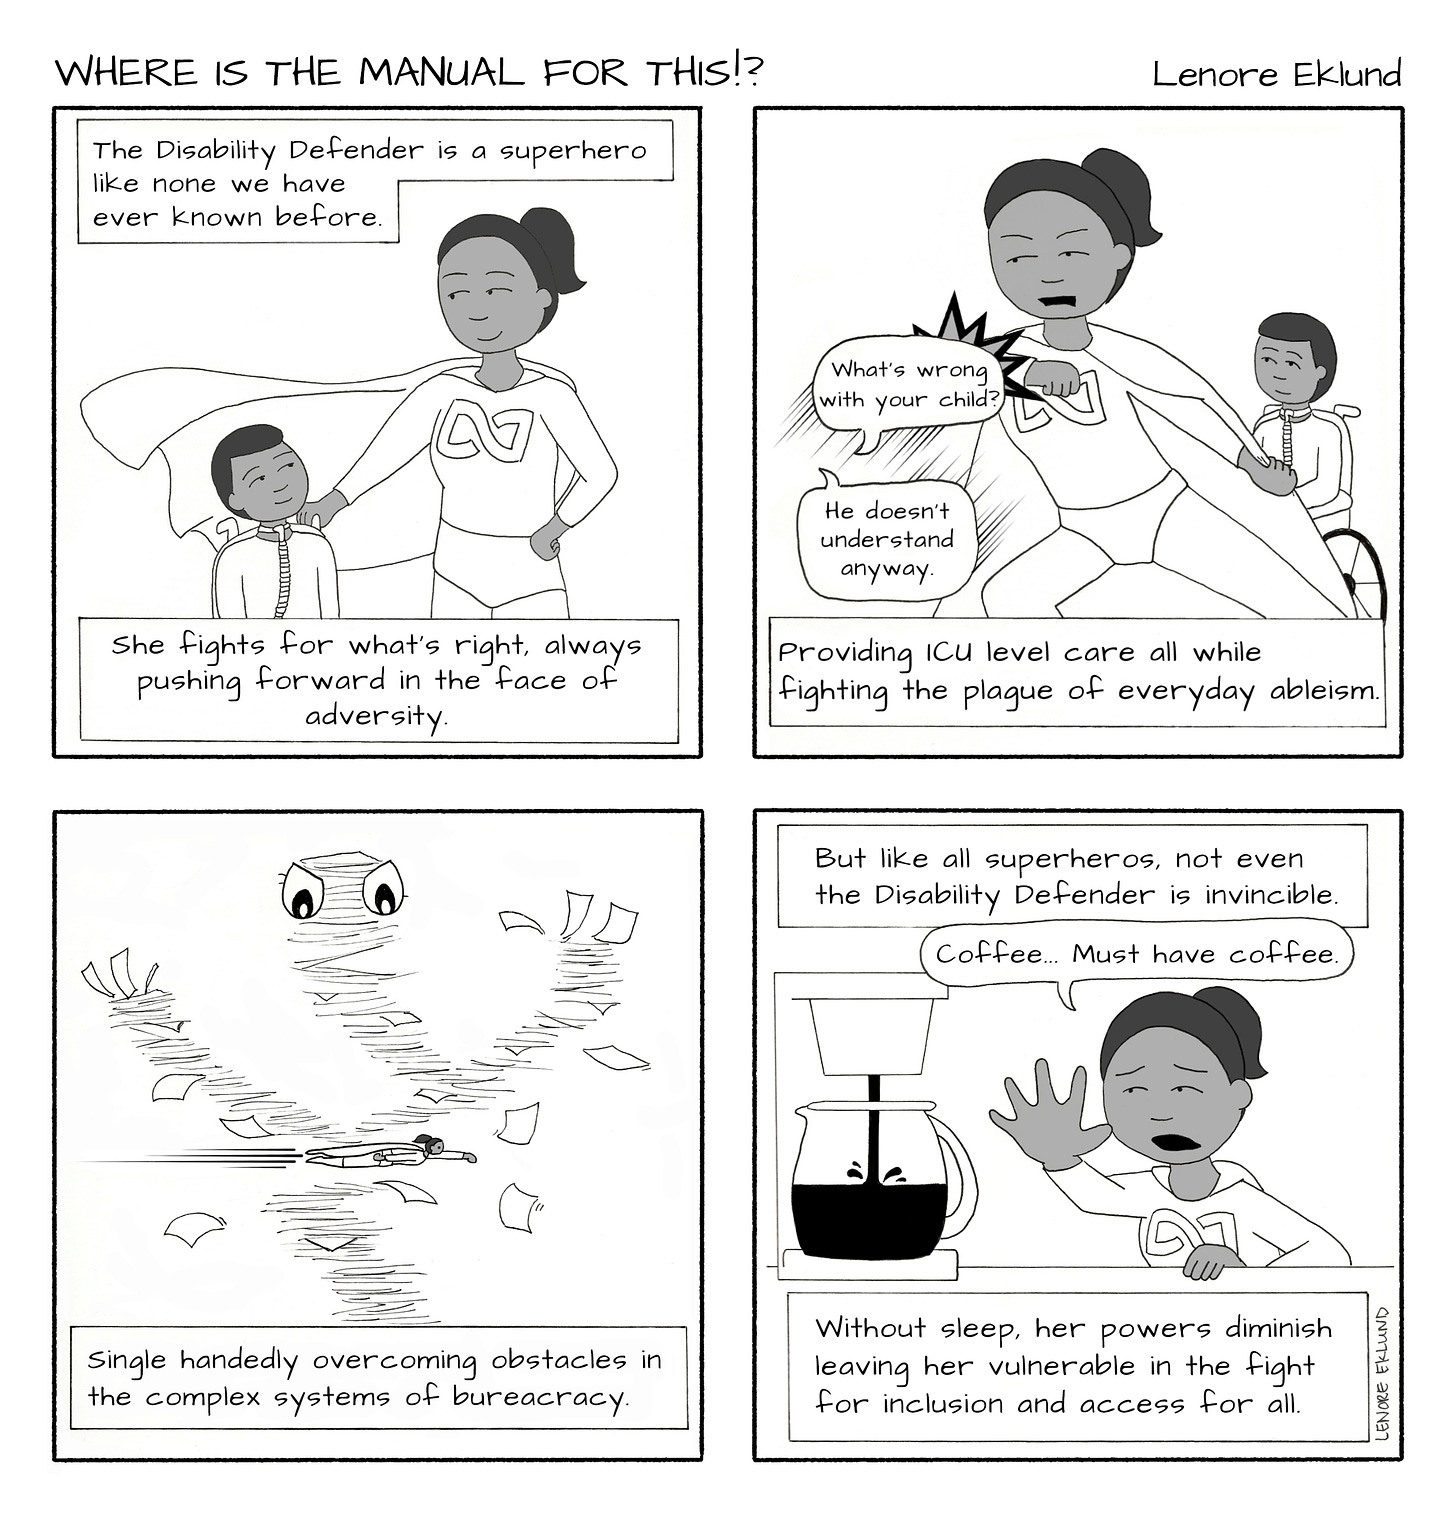 A four-panel line drawing cartoon titled Where is the Manual for This?!. The first panel has a mom in a superhero outfit with her hand on the shoulder of a short-haired child with a tracheostomy tube and a wheelchair. Mom and child are smiling at each other. The caption reads “The Disability Defender is a superhero like none we have ever known before. She fights for what’s right, always pushing forward in the face of adversity.” In the second panel, the mom blocks speech bubbles reading: “What’s wrong with your child?” And “He doesn’t understand anyway.” Her son sits innocently in the background. The caption reads: “Providing ICU-level care all while fighting the plague of everyday ableism.” In the third panel, the mom is superman flying through an evil tornado of paperwork with eyes. The caption reads: “Single-handedly overcoming obstacles in the complex systems of bureaucracy.” The final panel reads across the top: “But like all superhero, not even the Disability Defender is invincible.” The mom, desperate, strains for the coffeemaker, just out of reach. “Coffee… must have coffee,” reads the speech bubble. The caption continues: “Without sleep, her powers diminish, leaving her vulnerable in the fight for inclusion and access for all.”